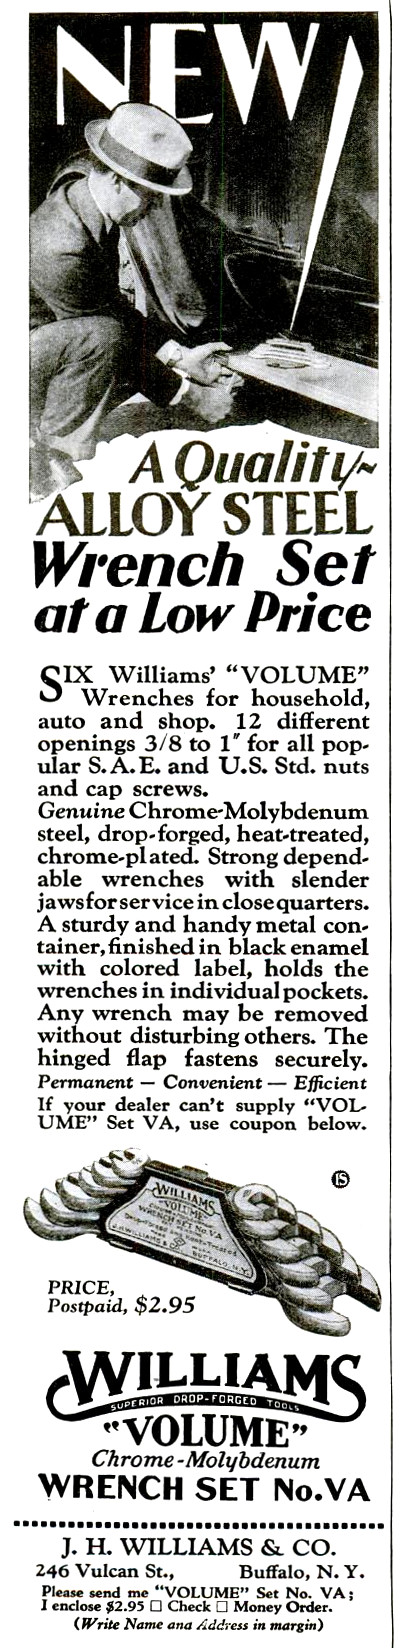 [1929 Ad for Williams Volume Wrenches]